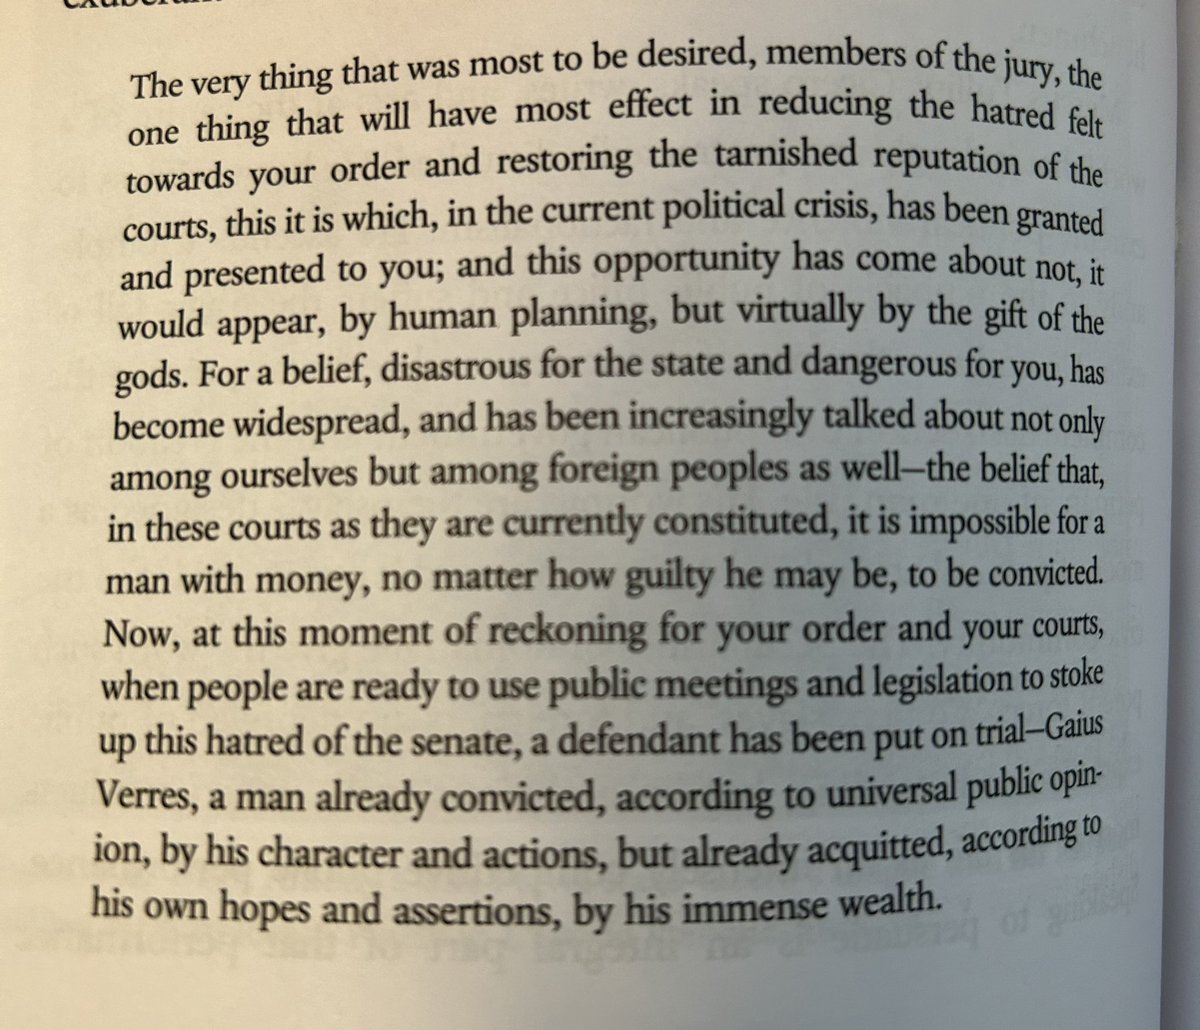 Cicero, “Against Verres” (see what’s going on in NYC with the 45th President of the USA)